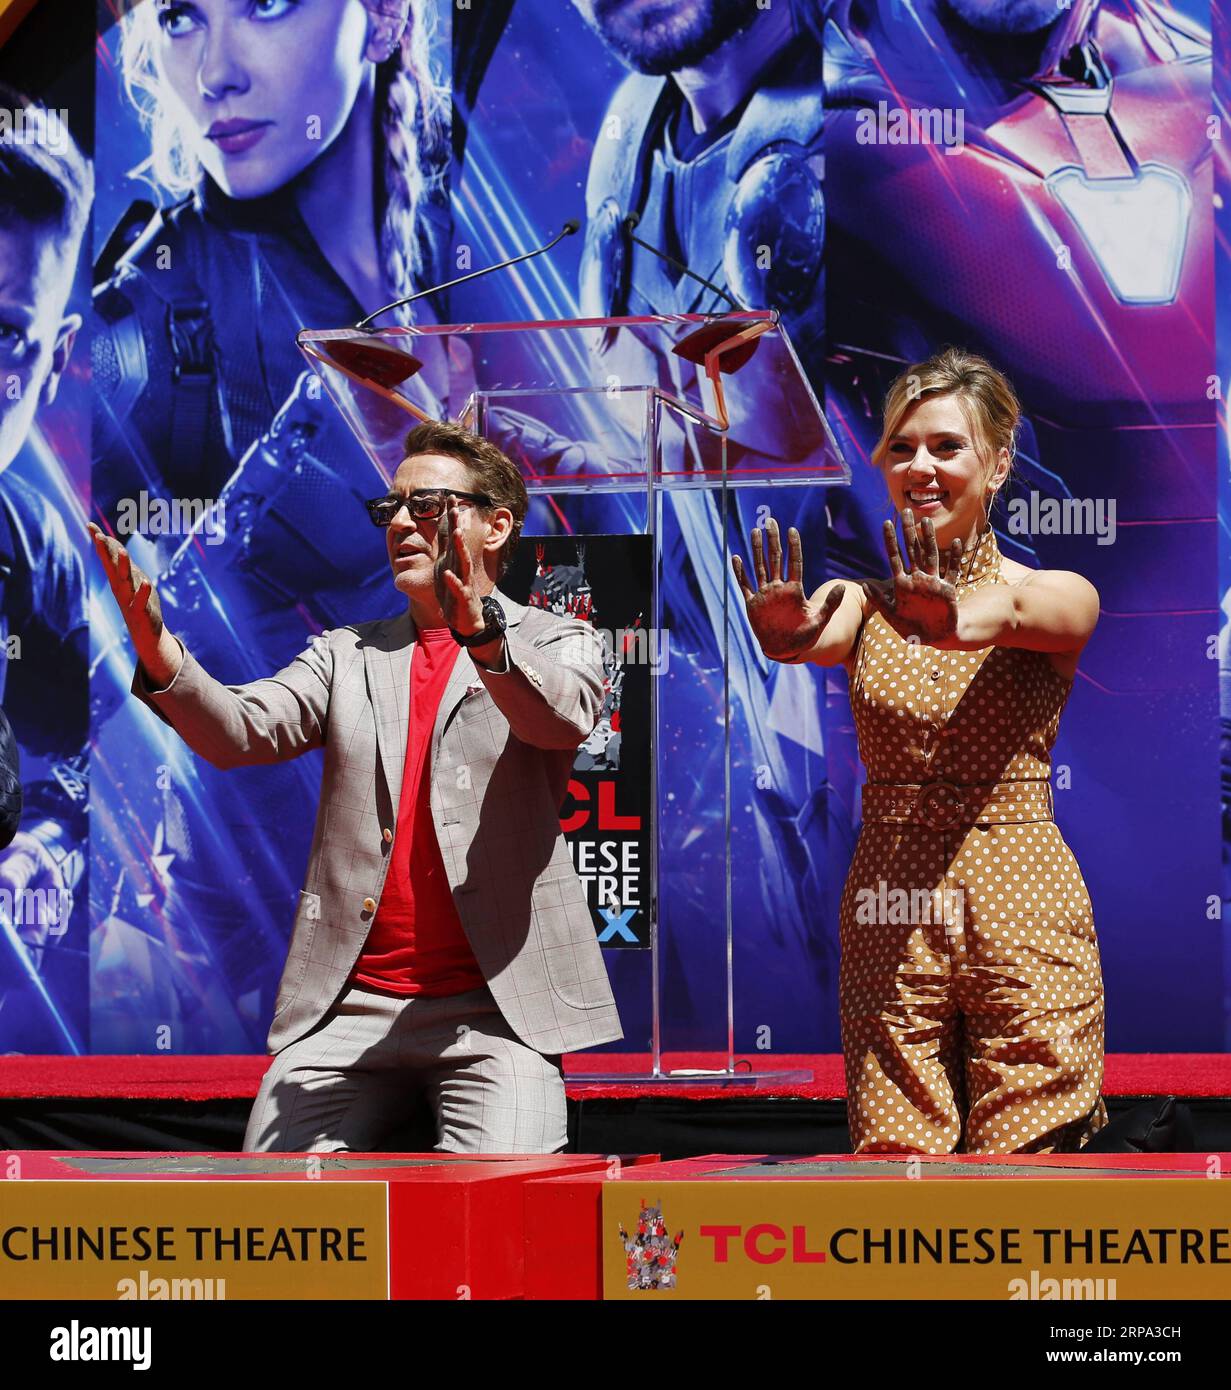 (190424) -- LOS ANGELES, April 24, 2019 (Xinhua) -- Actor Robert Downey Jr. (L) and actress Scarlett Johansson show their hands after putting their handprints in cement during print ceremony in the forecourt of the TCL Chinese Theater in Los Angeles, the United States, April 23, 2019. The cast of Marvel Studios Avengers: Endgame including Robert Downey Jr., Chris Evans, Mark Ruffalo, Chris Hemsworth, Scarlett Johansson, and Jeremy Renner, along with Marvel Studios President Kevin Feige, received one of Hollywood s oldest accolades this Tuesday, to sign their names and put their handprints in c Stock Photo